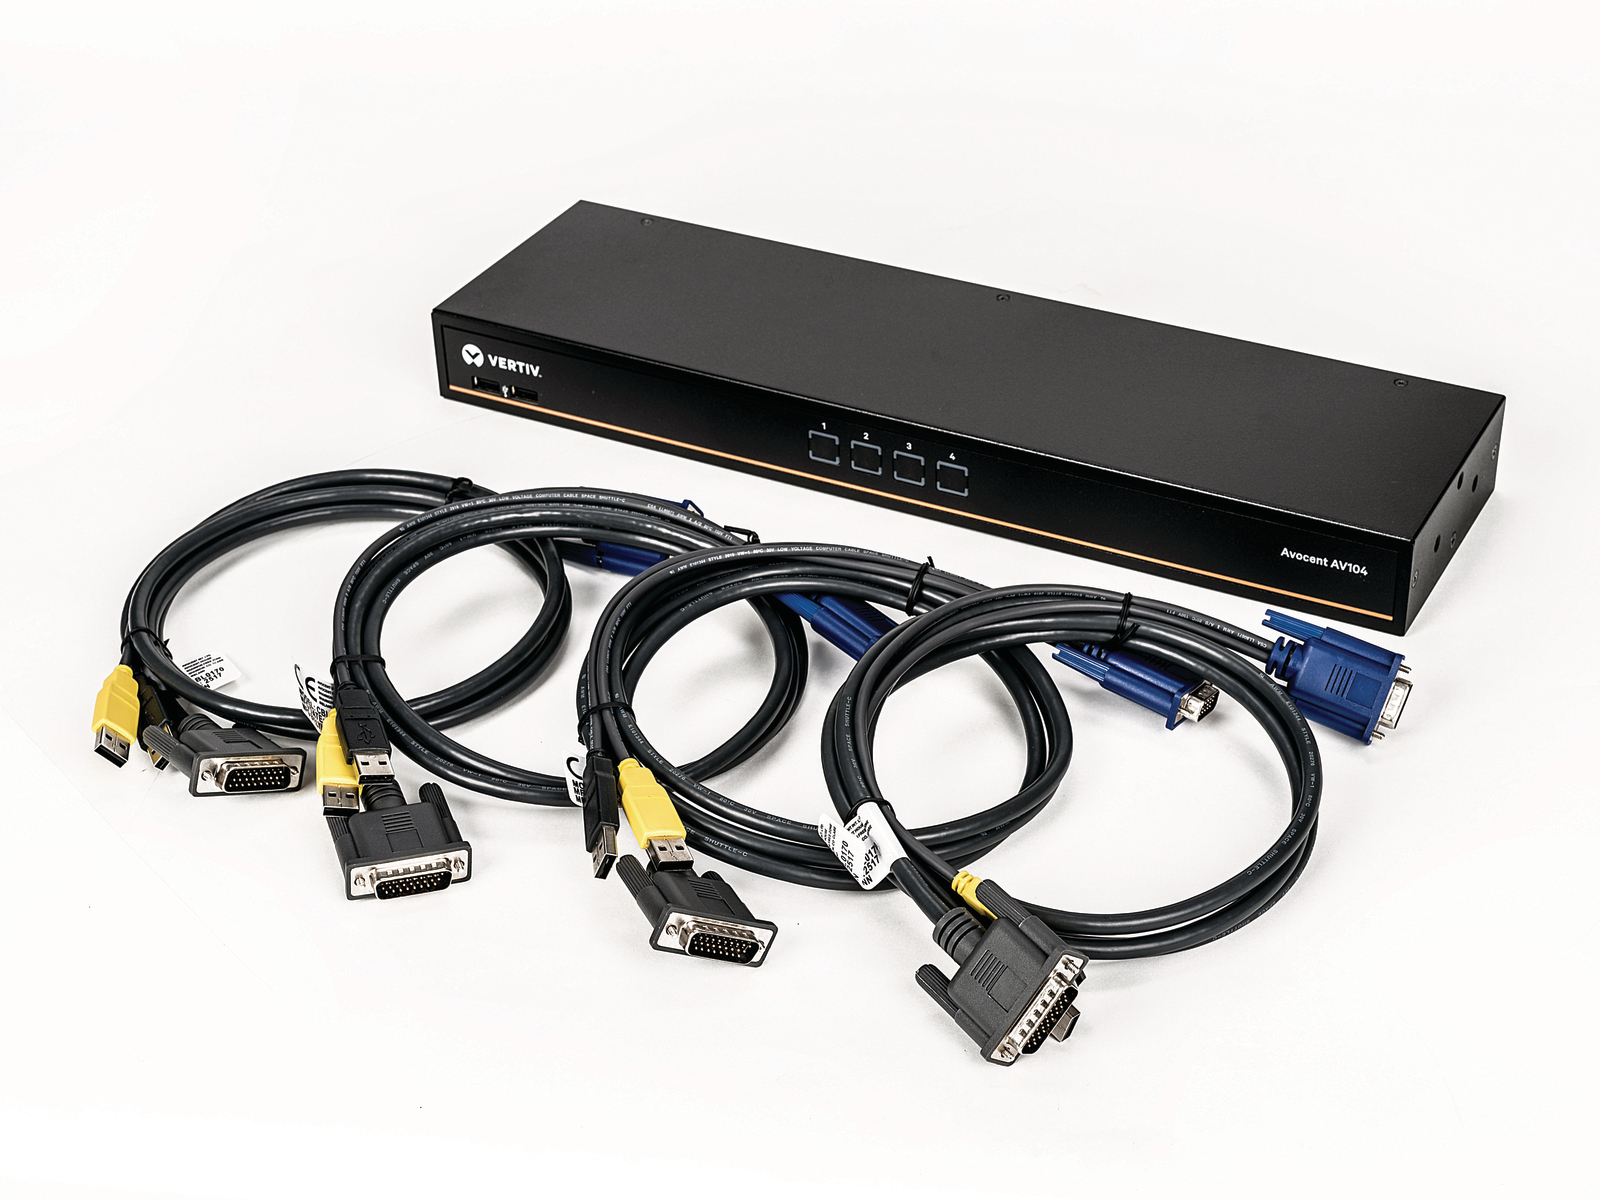 Avocent AutoView AV104 - KVM switch - 4 x KVM port(s) - 1 local user - desktop, rack-mountable - AC 100 - 240 V - with 4 x 26-pin to VGA cables